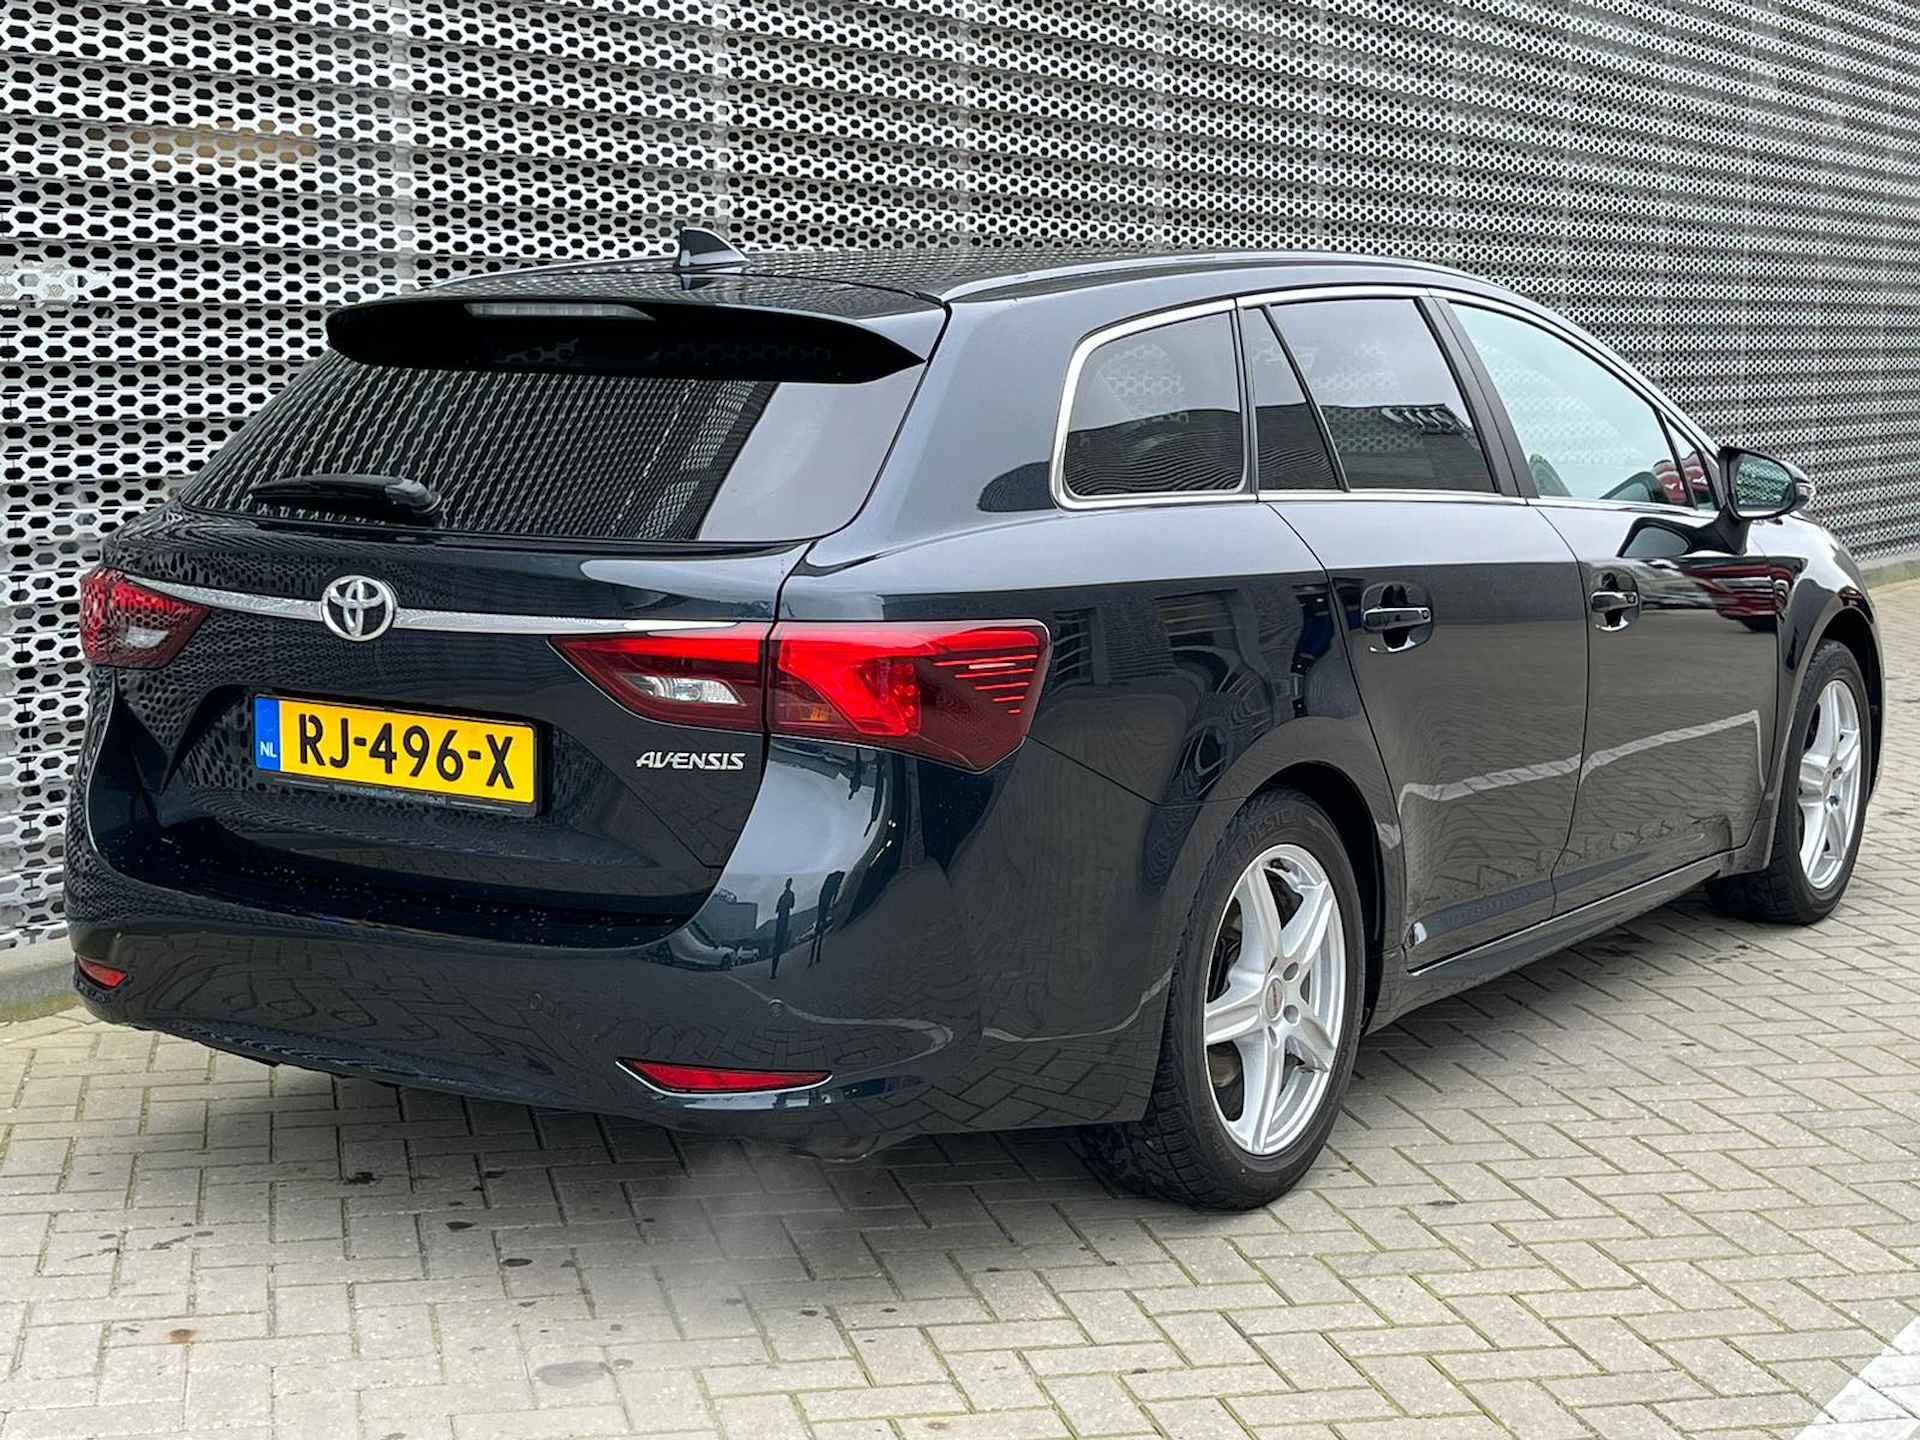 Toyota Avensis Touring Sports 1.8 VVT-i SkyView Edition - 8/28